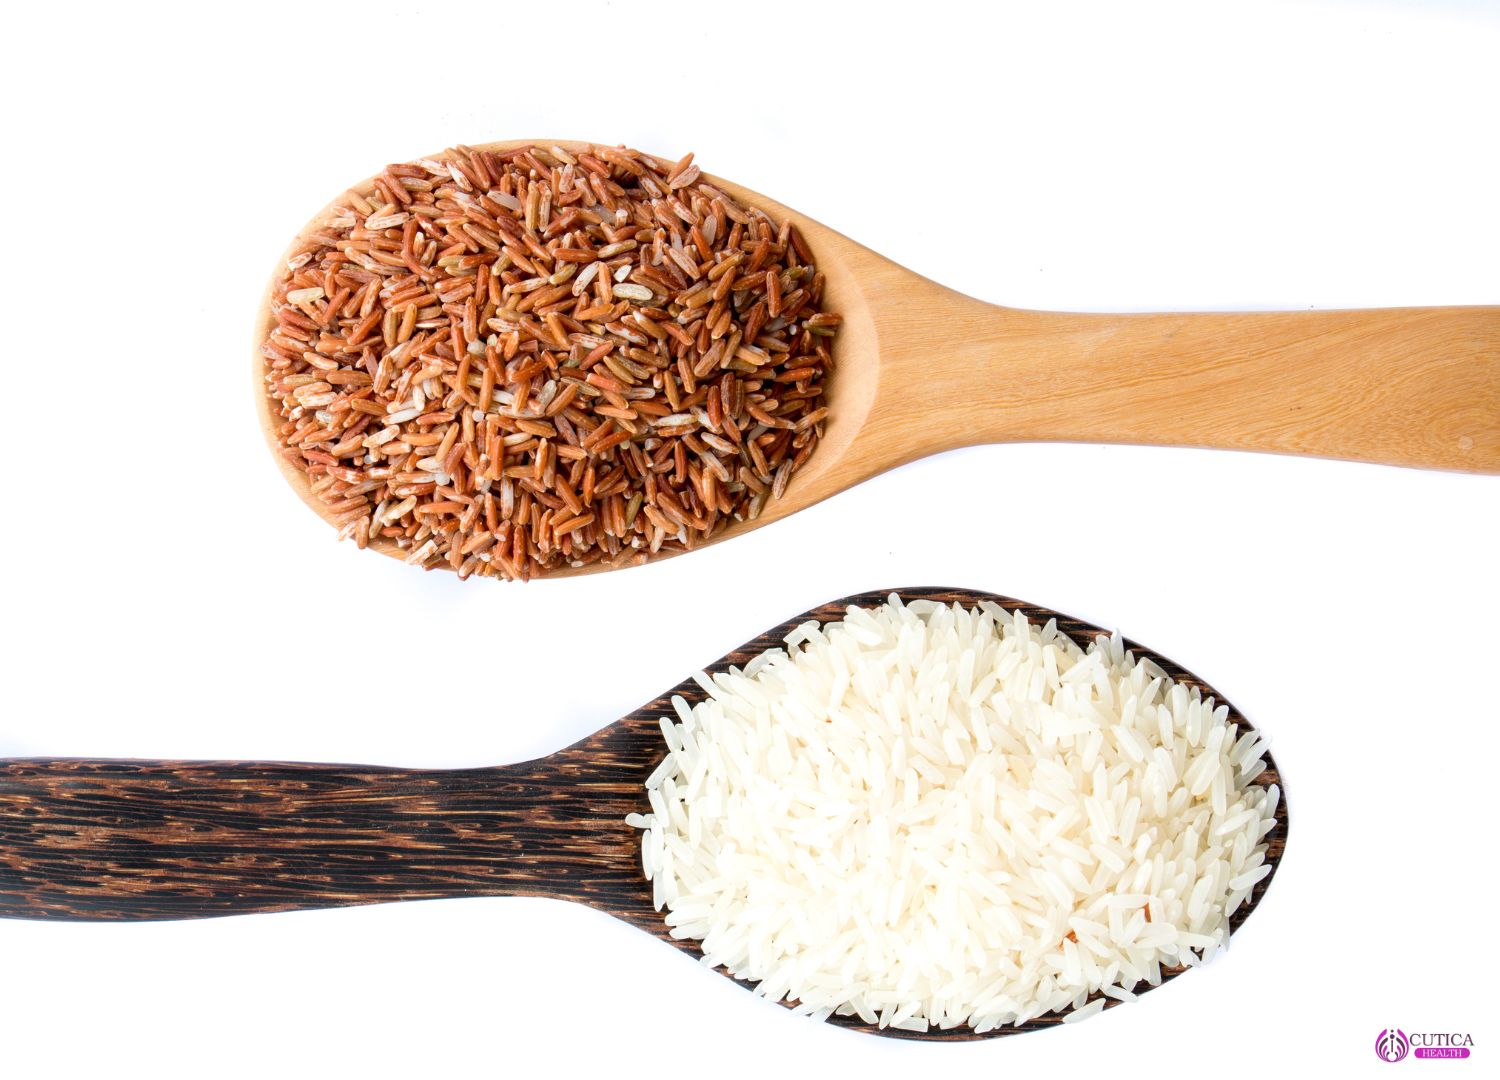 Brown Rice vs. White Rice: Nutritional Differences and Health Benefits